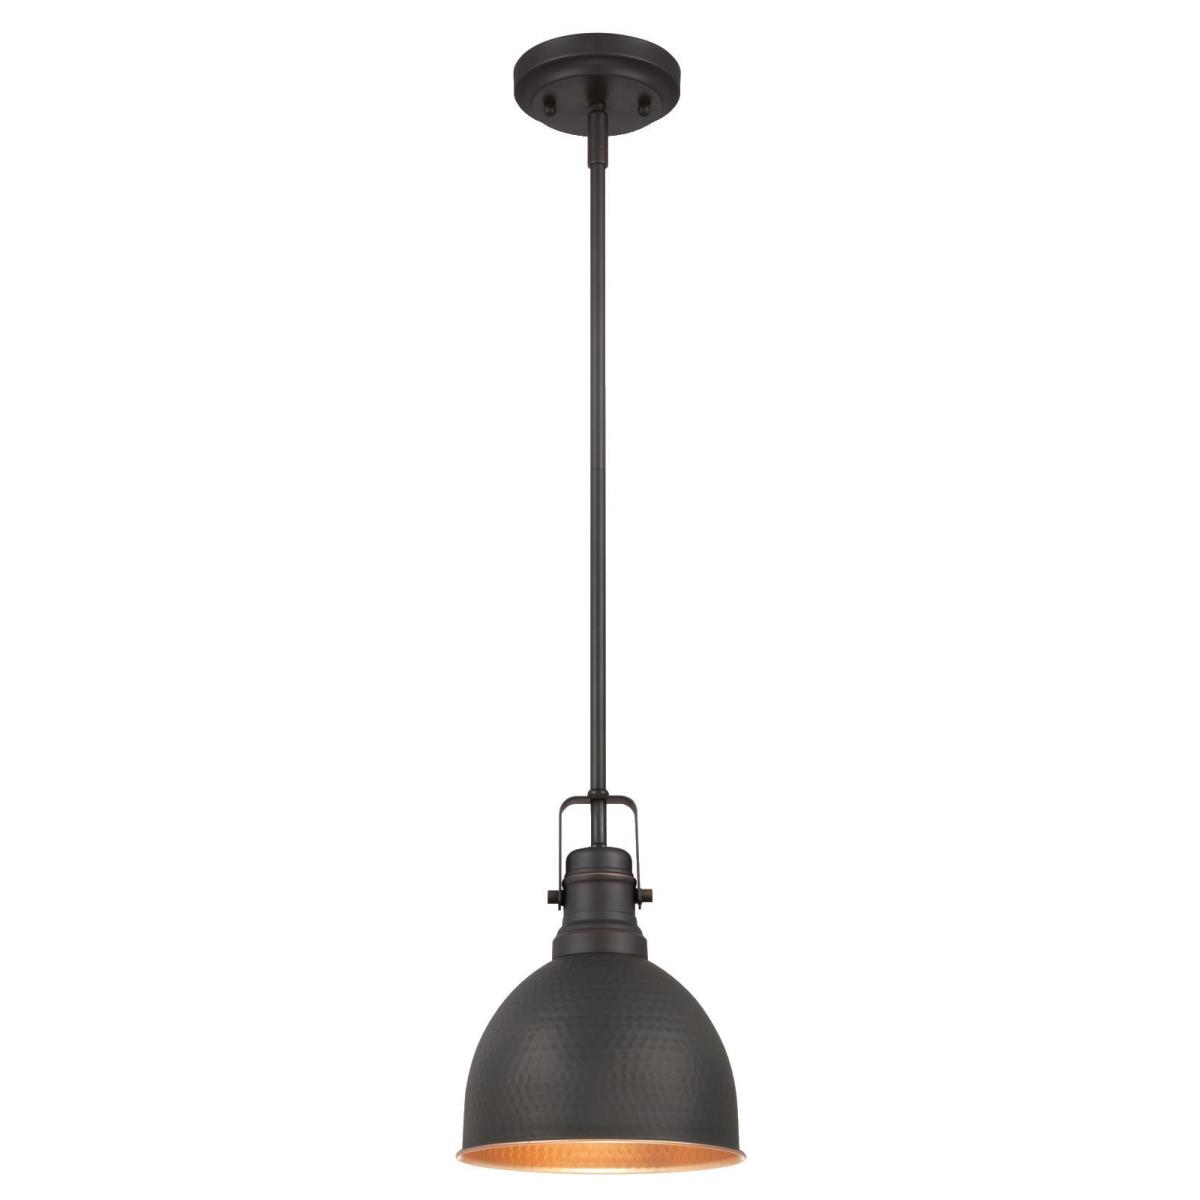 1 Light Mini Pendant Hammered Oil Rubbed Bronze Finish with Highlights